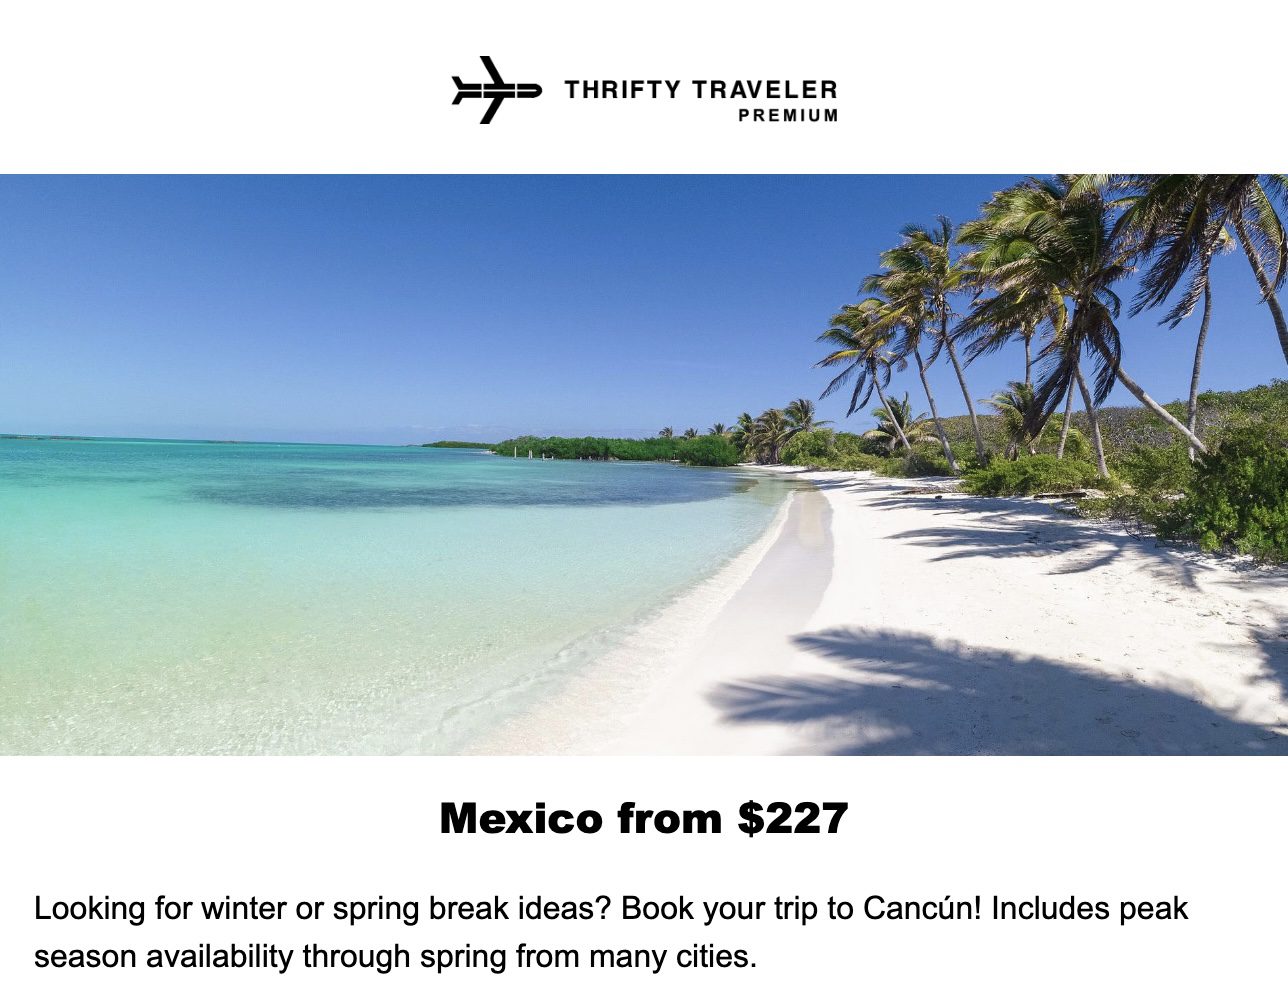 Cheap flights to Mexico